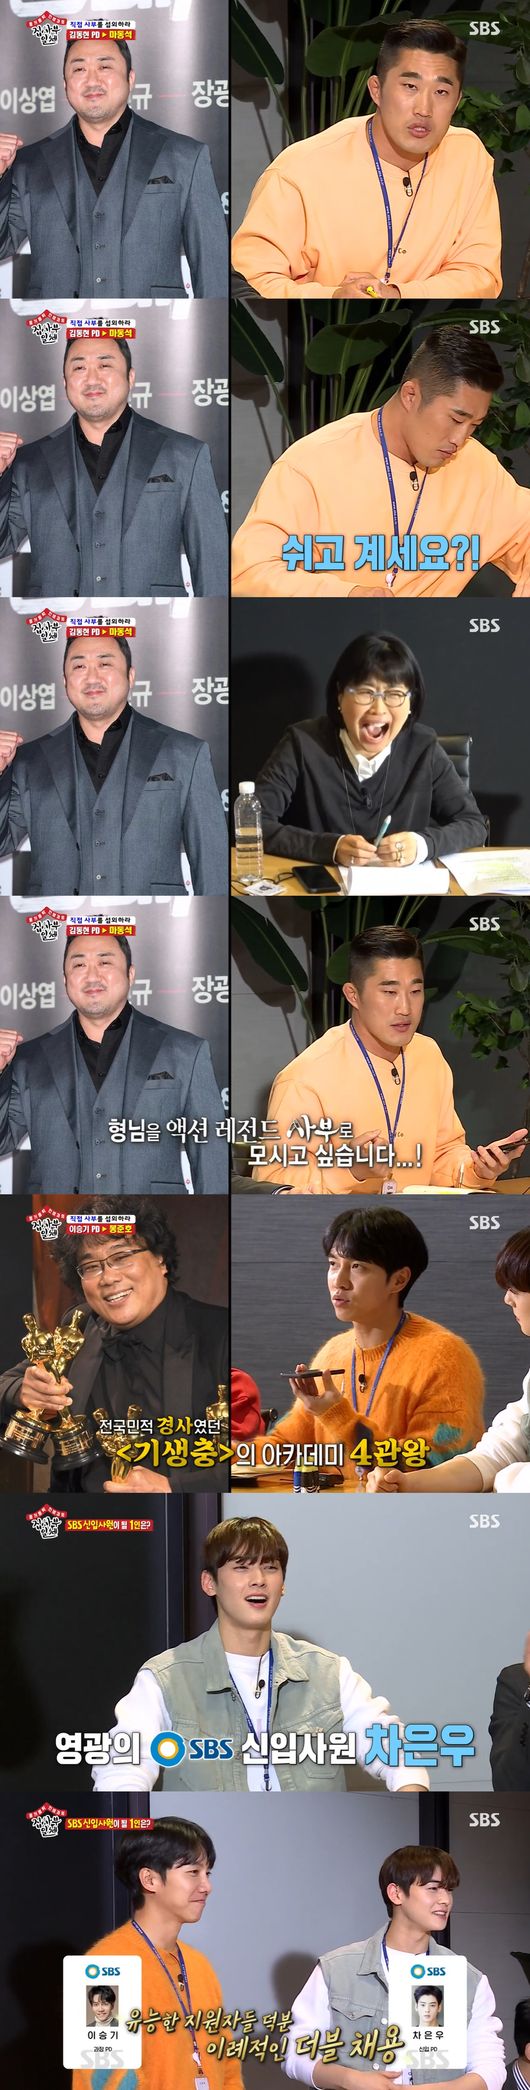 All The Butlers Lee Seung-gi, Shin Sung-rok, Yang Se-hyeong, Jung Eun-woo and Kim Dong-Hyun predicted a different fun while Top Model directly in the masters office.Han Ji-min, Baek Jong-won, You Hee-yeol, Ma Dong-Seok and Bong Joon-ho showed positive answers.In SBS All The Butlers broadcasted on the afternoon of the 26th, Lee Seung-gi, Shin Sung-rok, Yang Se-hyeong, Cha Jung Eun-woo, and Kim Dong-Hyun, who received the mission of Lets get a masterOn this day, All The Butlers members listened to the last mission of Sambu and mobilized their personal connections.Shin Sung-rok, who first came to Top Model, saying hands tremble, pointed to Han Ji-min, who carefully said, Can you speak for a minute?, and Han Ji-min said, Wait, what, I thought you were drunk.Also, Han Ji-min, in Shin Sung-roks offer of a referral to him, said, What Master of me? Youre making ridiculous noise.Youre really good at broadcasting, arent you????????????????????????????????????????????????????????????????????????????????????????????????????????????????????????????Call me after youre done, he said, making me look forward to appearing as a master.All The Butlers youngest car, Jung Eun-woo, said, I have never contacted you in private, so I did not have a contact information personally.I feel sorry, he said, calling You Hee-yeol.But You Hee-yeol was nervous about the car Jung Eun-woo, who asked for his first call, saying, I was thinking, Is this friend more sane than he looks?Especially, You Hee-yeol said, Where are you now? And toward Jung Eun-woo, who seems to be going to visit right now.Jung Eun-woo is very aggressive. Its not a good term for broadcasting, but its a stone + child. In the end, You Hee-yeol promised to appear in All The Butlers, saying, I am not confident that I will do well, but If I can meet next time, it will not be bad to meet and talk later.All The Butlers Yang Se-hyeong mentioned Baek Jong-won, saying, It is food that accounts for more than 80% of happiness in life, but it is a senior who tells the food.Its a good idea, lets think about it and say it, replied Baek Jong-won, who is showing off his pleasant breathing with Yang Se-hyeong through other programs.Kim Dong-Hyun was the top model in the actor Ma Dong-Seok, who was rarely featured in the entertainment program.Ma Dong-Seok said, Im preparing for the movie Crime City 2 and Im resting because I cant shoot. Tell me anything.Anything Dong Hyun asks (it is possible), he expressed his unusual affection for Kim Dong-Hyun.Ma Dong-Seok also said, The martial arts legend Kim Dong-Hyun came out, but I do not think I need to go out again. Kim Dong-Hyuns proposal, Why do not you try to fight with me? He promised, I will make fun when it is time.All The Butlers Lee Seung-gi worked hard to win the Academys four-time title, Bong Joon-ho.I have never actually met, but I received a number from the production team for the appearance of All The Butlers.Lee Seung-gi said, I am a new person who wrote the history of Korea, but said, I also want to be honest.However, when Bong Joon-hos cell phone was turned off and he did not answer the phone, Lee Seung-gi left a voice message saying, I wanted to call you once.All The Butlers, which has a strong impression on viewers every time, with various masters such as sports and baduk beyond the entertainment industry.It is expected that Han Ji-min, You Hee-yeol, Baek Jong-won, Ma Dong-Seok and Bong Joon-ho will be able to show off the charm of reversal that they have not seen in the broadcast through All The Butlers.On the other hand, SBS All The Butlers is a life tutoring program for young people full of question marks and my way geek masters. It is broadcast every Sunday at 6:25 pm.SBS All The Butlers captures broadcast screen